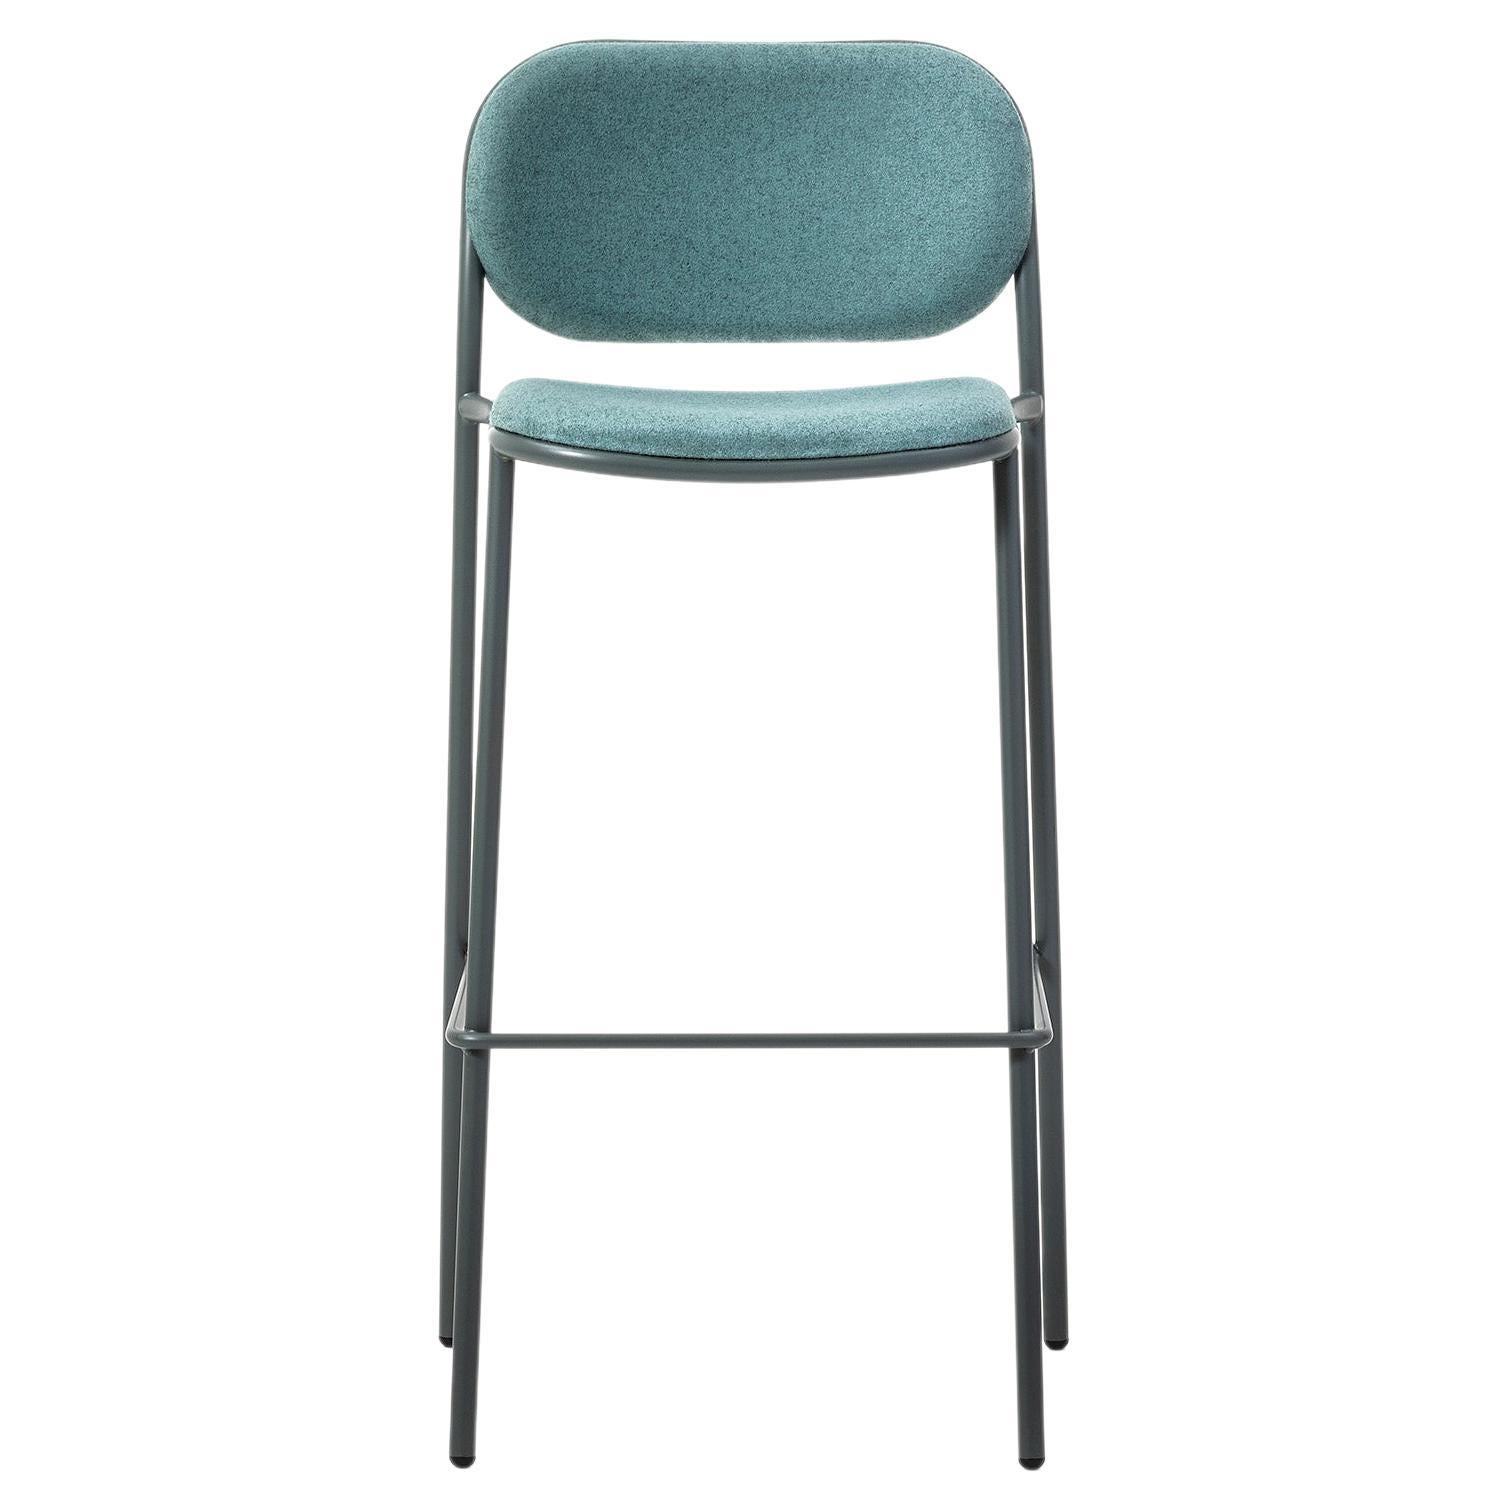 Metis Pad 184 Stool Metal, Colors, Contract, Bar, Restaurant, Design, Fabric  For Sale